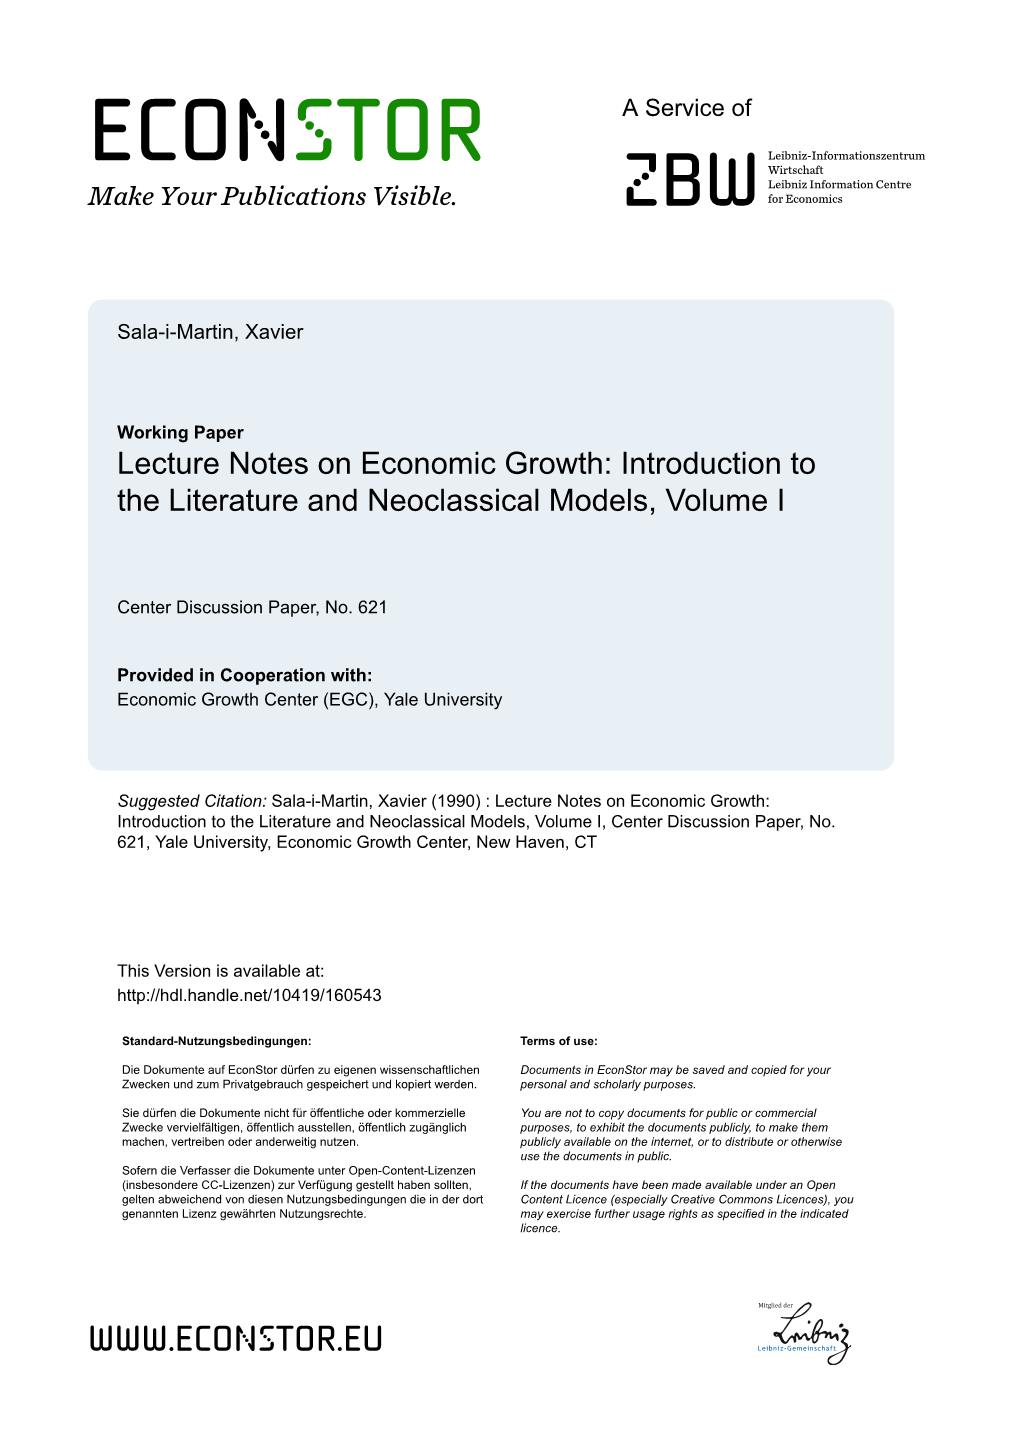 Lecture Notes on Economic Growth: Introduction to the Literature and Neoclassical Models, Volume I